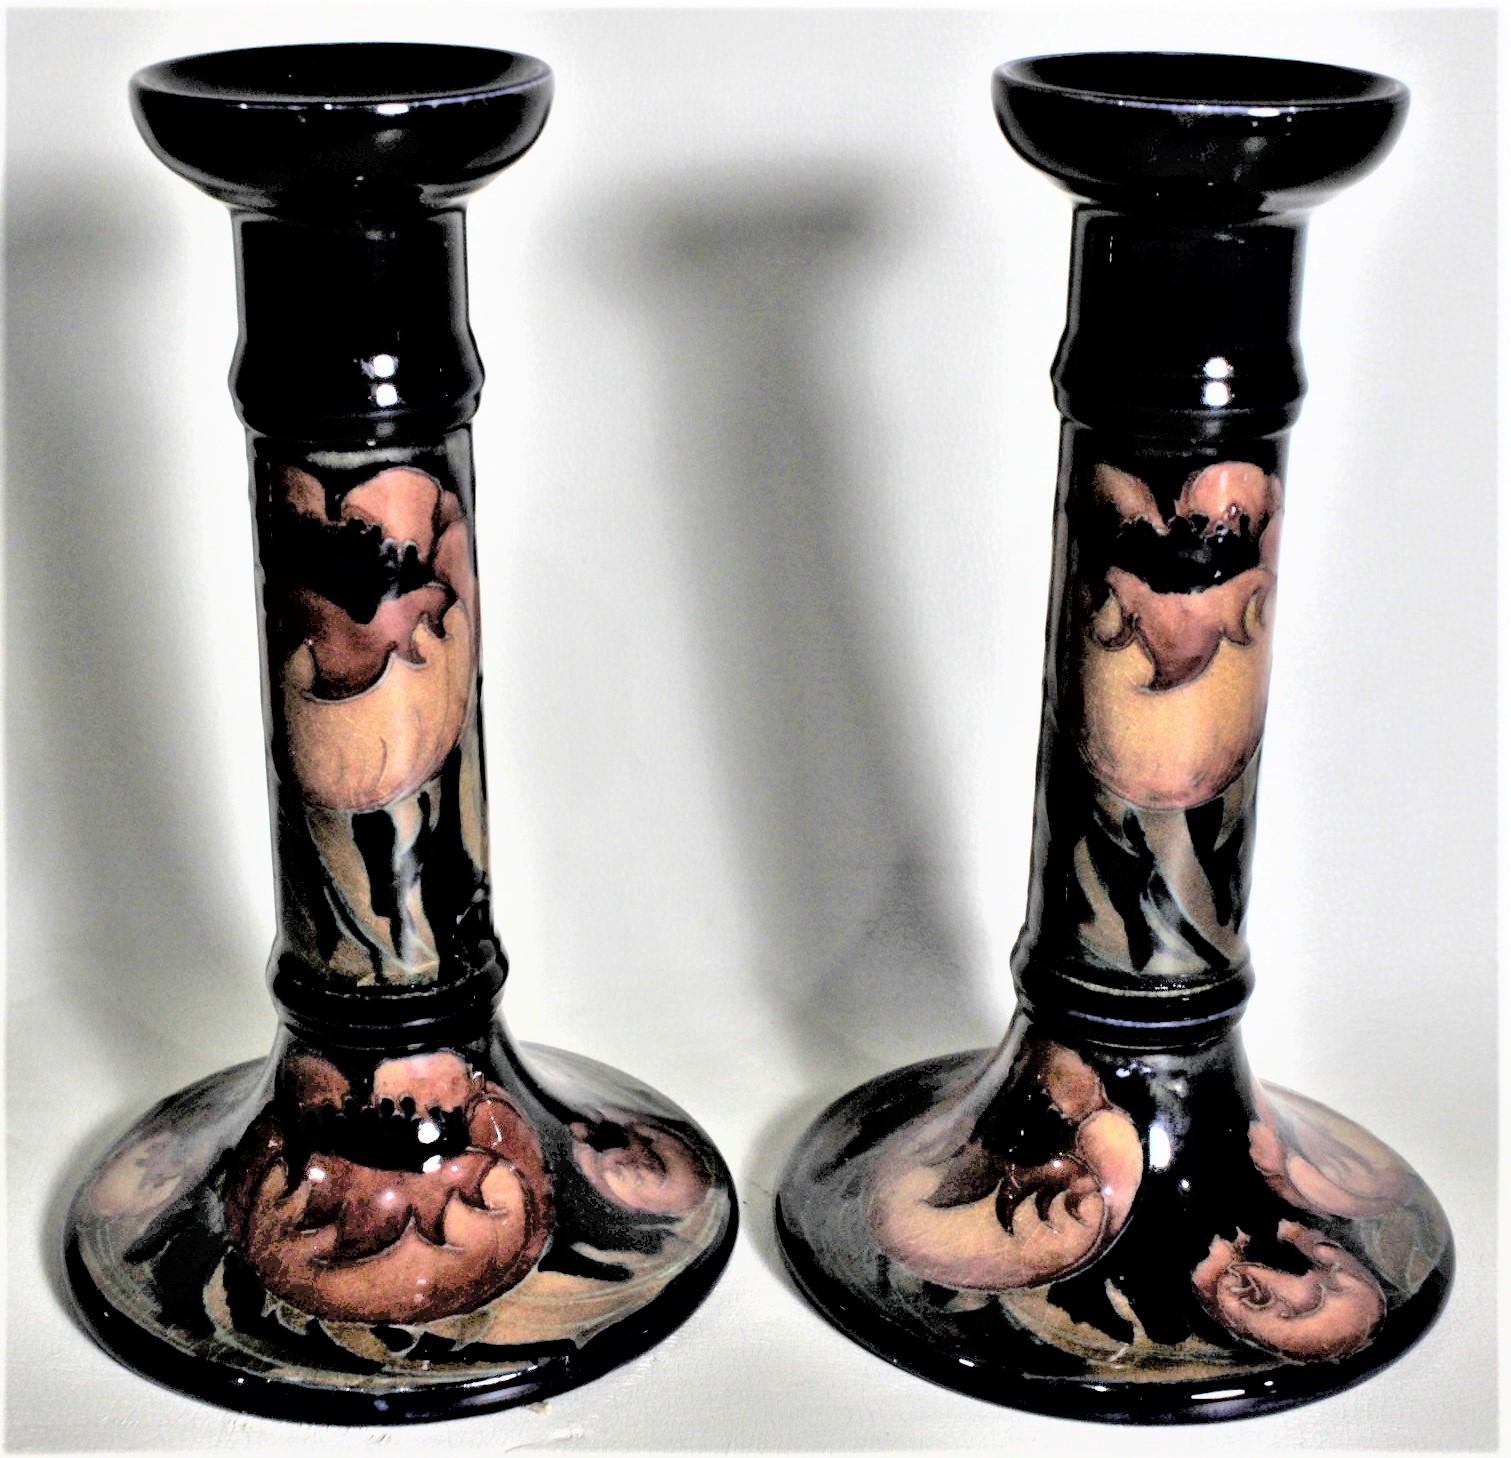 This pair of art pottery candlesticks or candle holders was done by the Moorcroft Pottery company of England in circa 1939 using their signature deep cobalt, appearing almost black in this case, blue ground and done in their 'Poppy' pattern. The